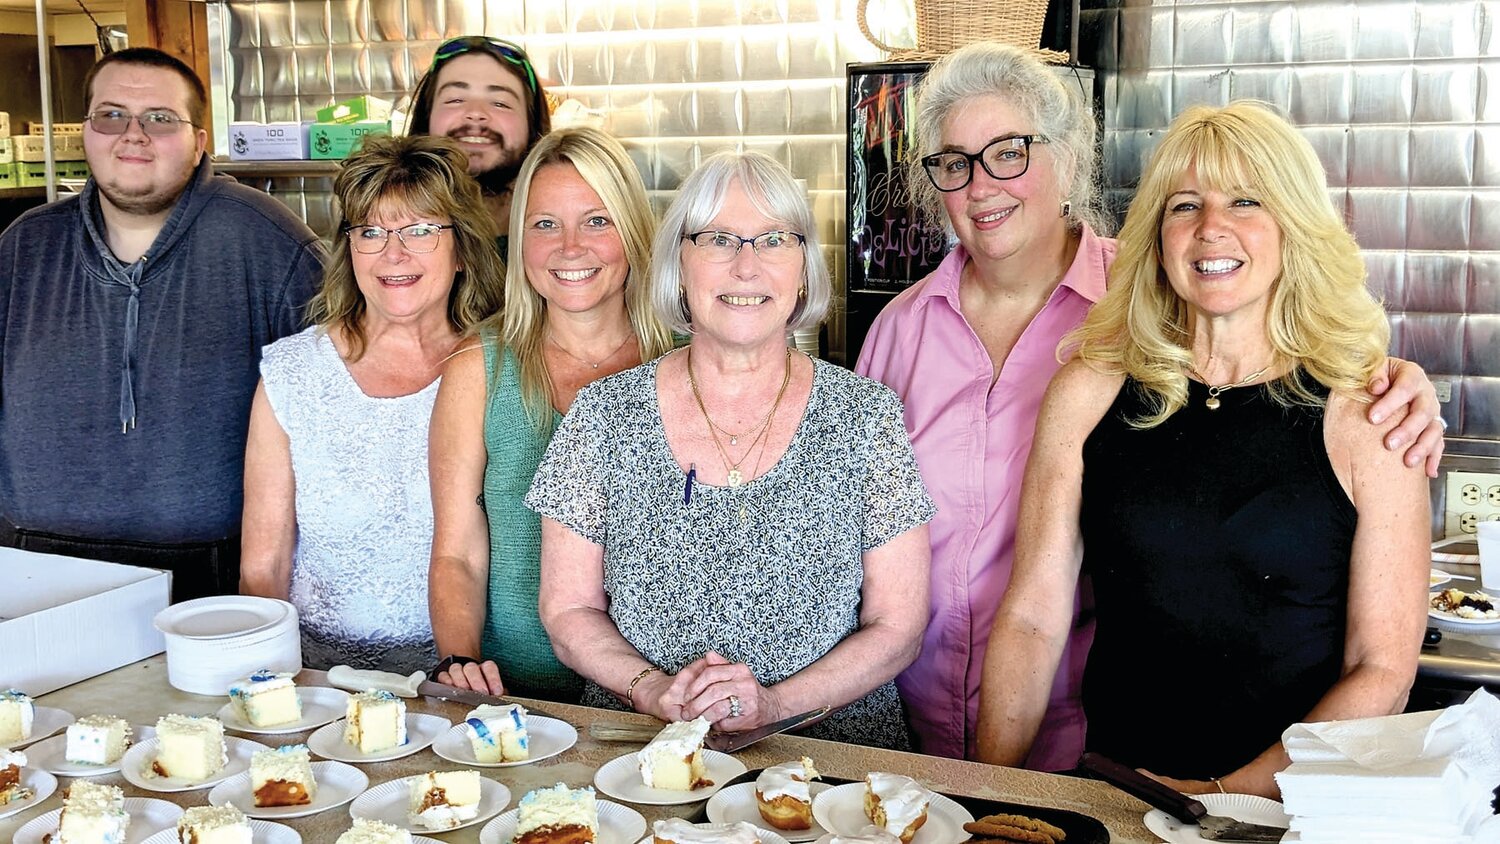 From left: Jacob Stephenson, dishwasher; Patti Kerr, former employee; Brad Benner, host; Jodie Vincent, waitress; Jo Ann Kerr; Pat Courtney; Rachelle Alderfer, waitress pose for a photo at the R&S Keystone Diner in Hilltown, which closed last week after 75 years in business.